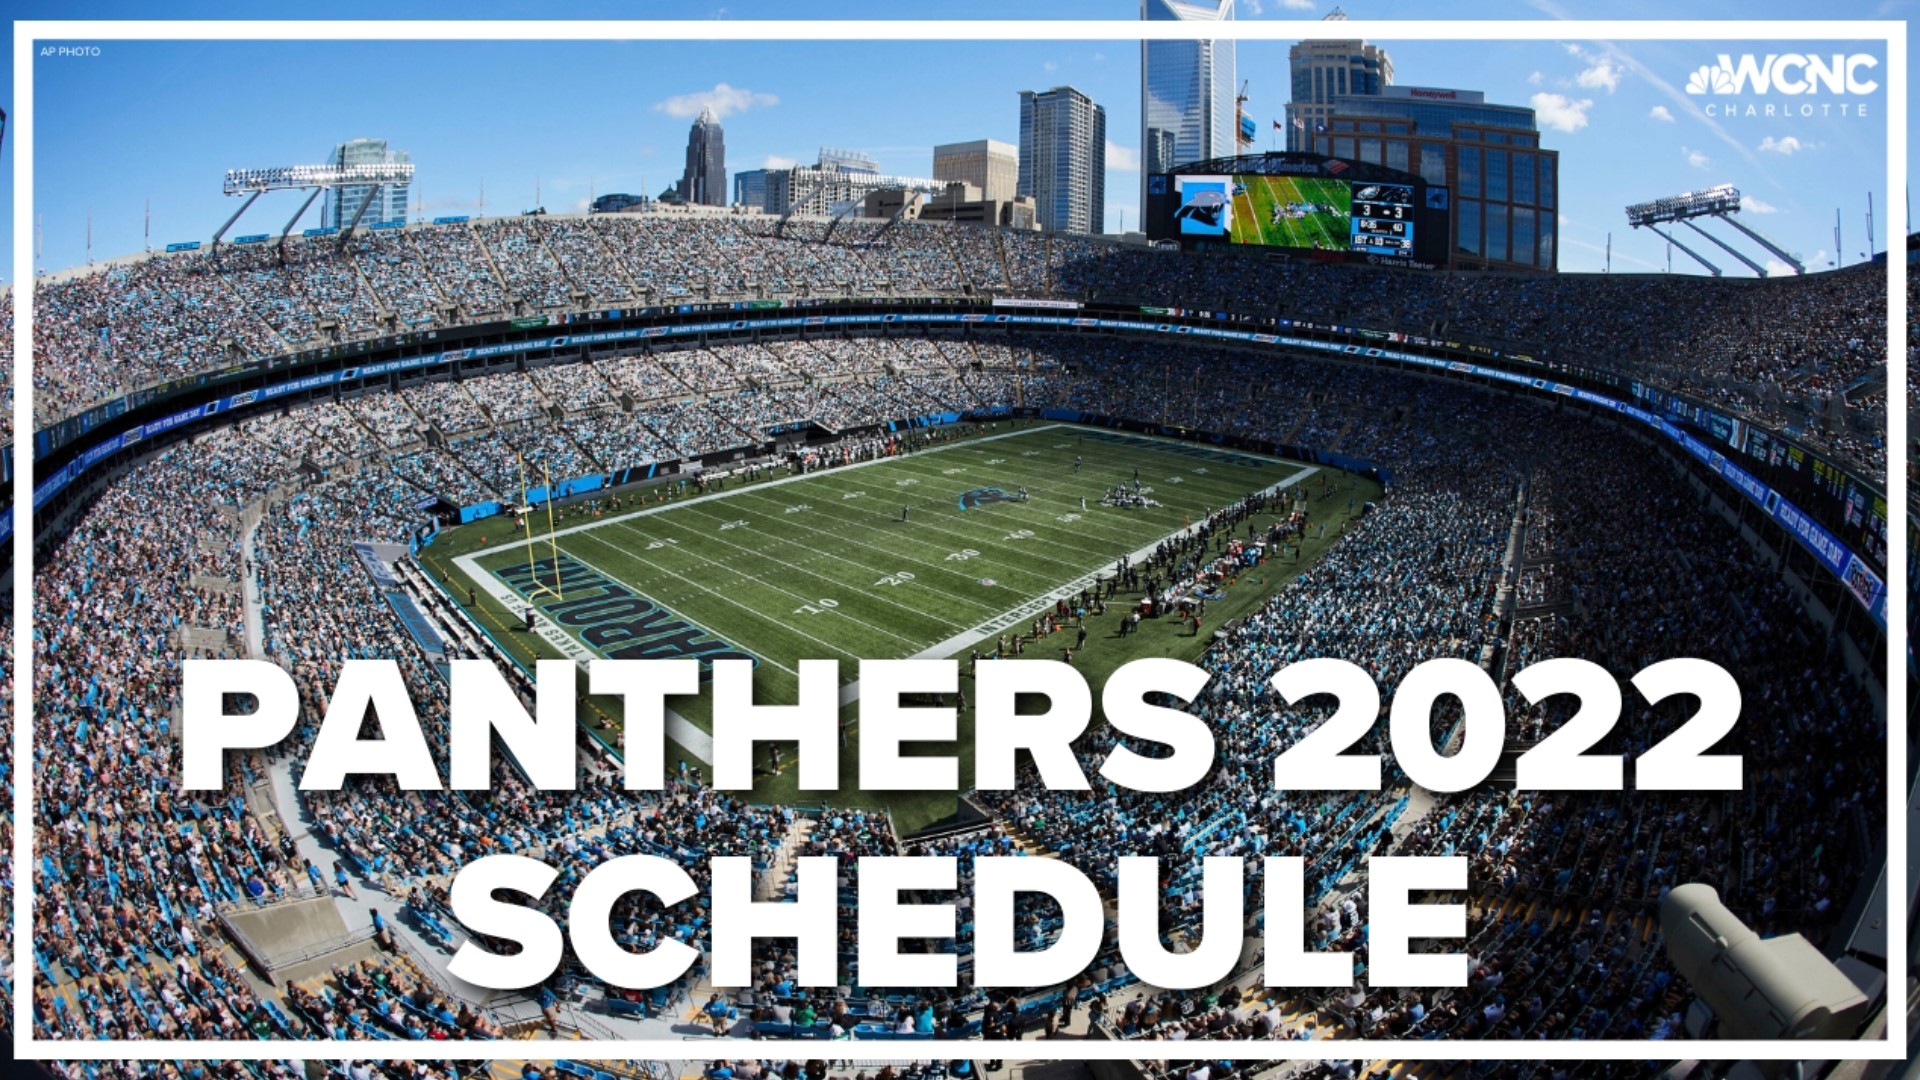 The NFL has announced its 2022 schedule -- including a prime-time game for the Panthers in Charlotte against the Atlanta Falcons.